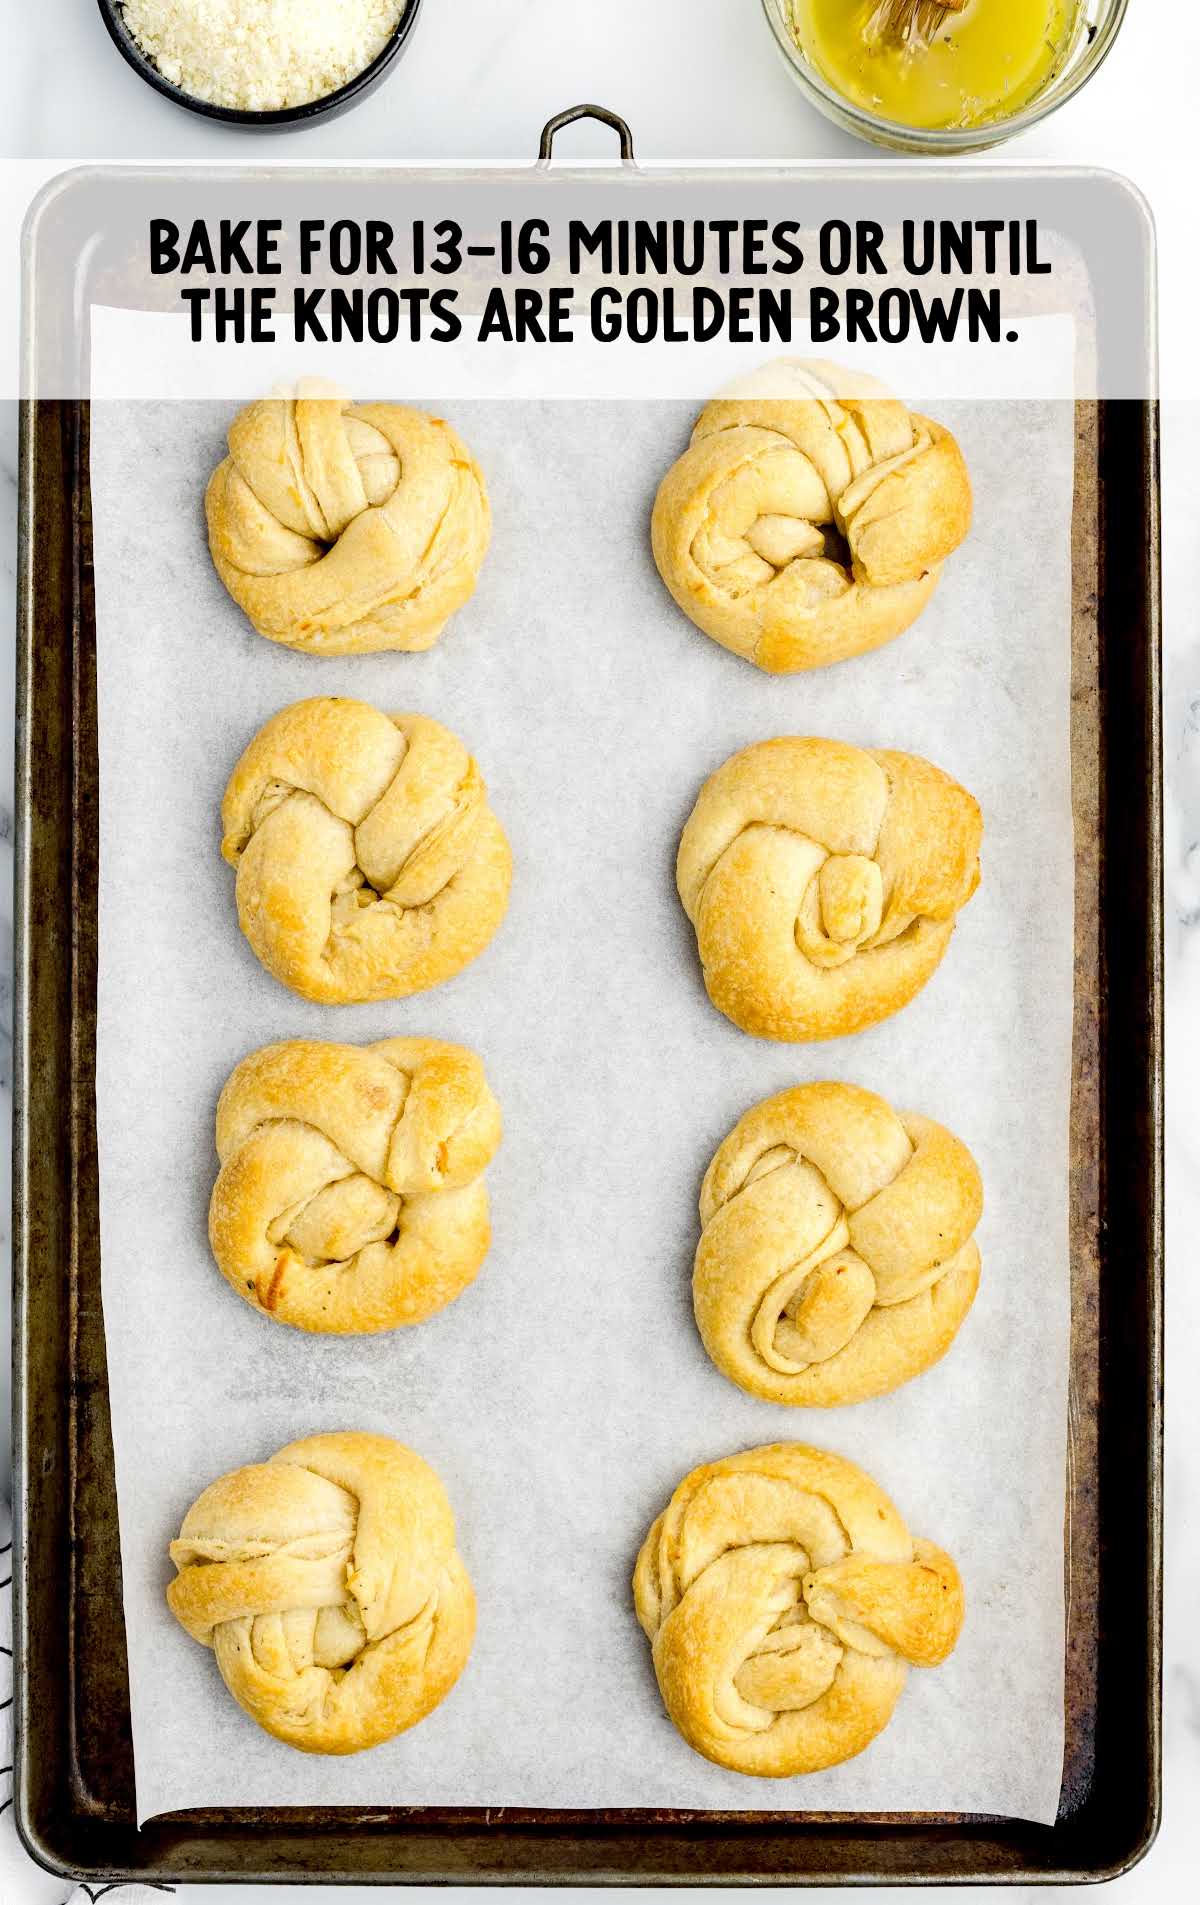 bake knots for 13 to 16 minutes